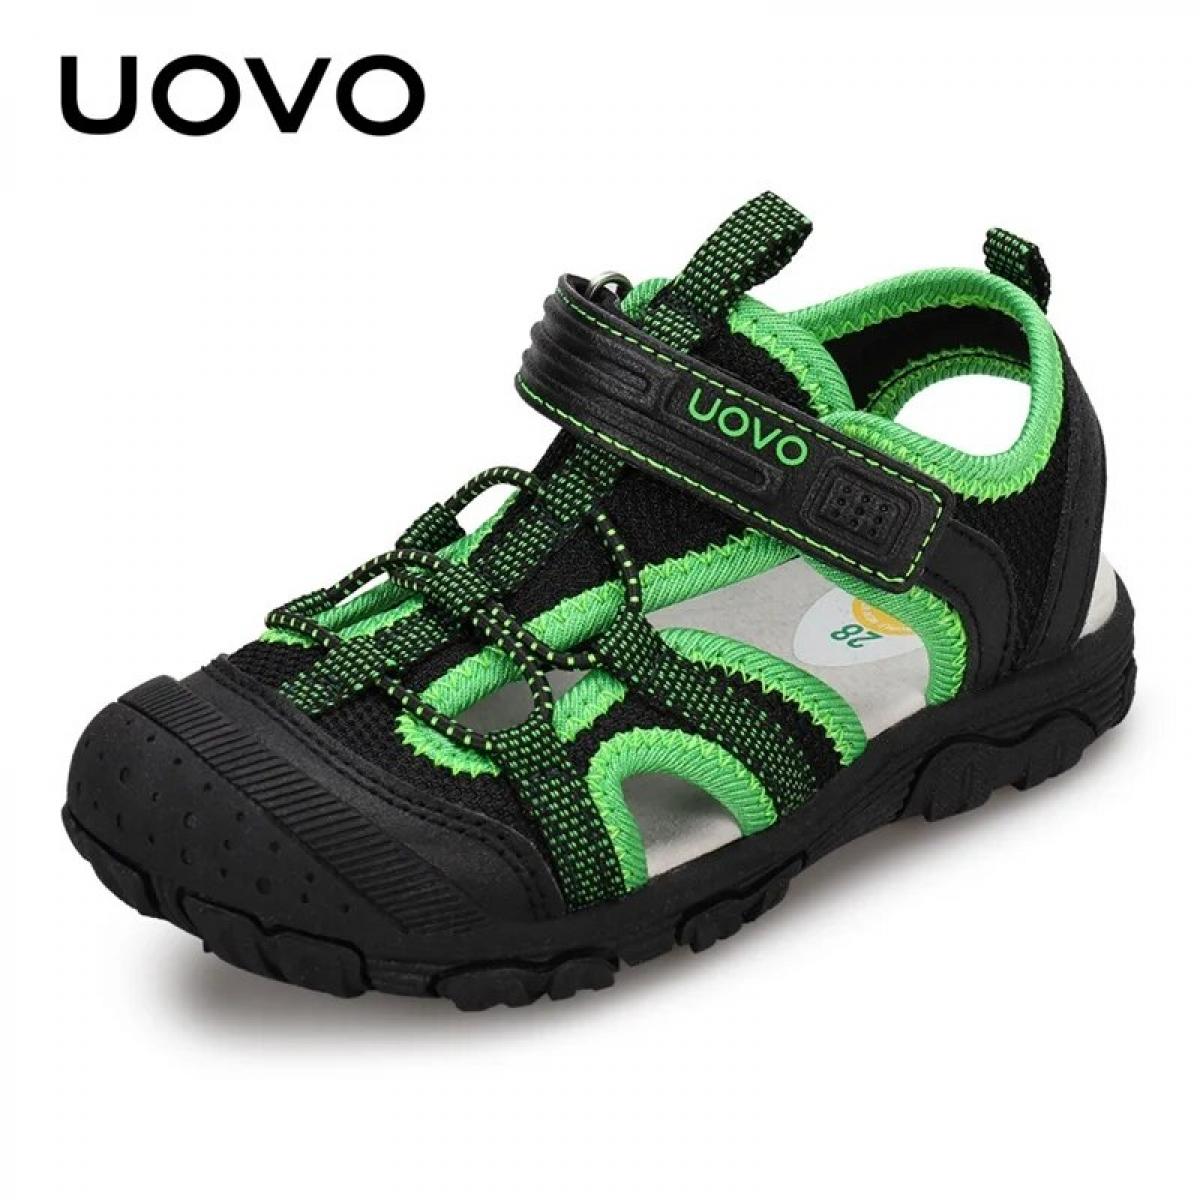  New Arrival Children Footwear Closed Toe Sandals For Little And Big Sport Kids Summer Shoes Eur Size #22 34